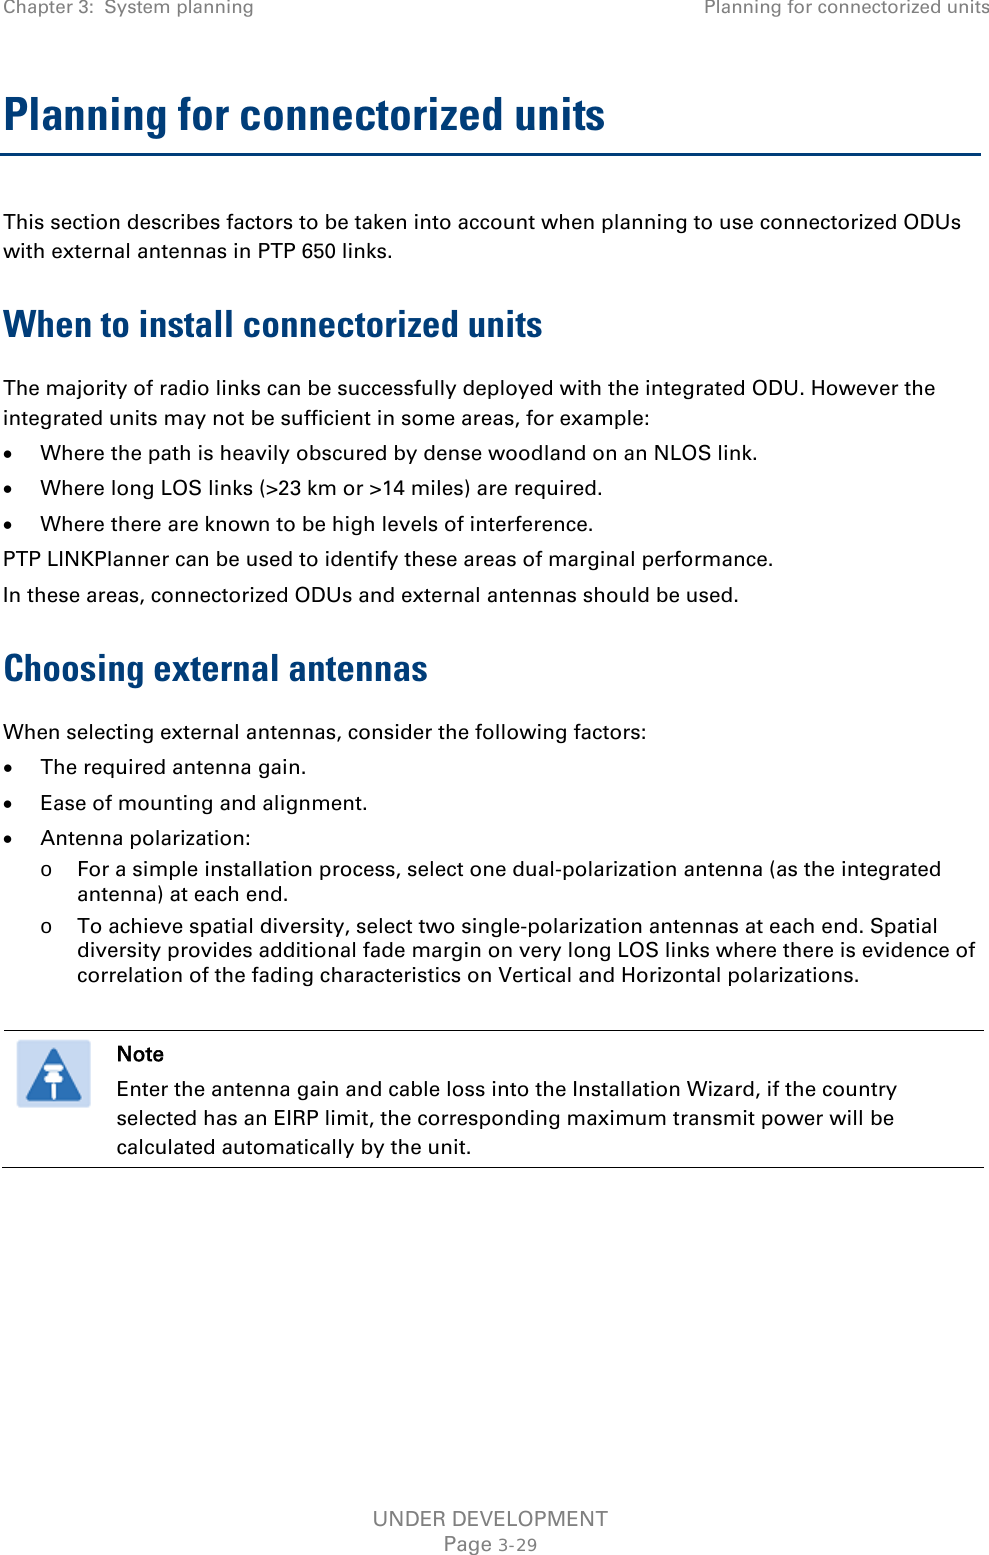 Chapter 3:  System planning Planning for connectorized units  Planning for connectorized units This section describes factors to be taken into account when planning to use connectorized ODUs with external antennas in PTP 650 links. When to install connectorized units The majority of radio links can be successfully deployed with the integrated ODU. However the integrated units may not be sufficient in some areas, for example: • Where the path is heavily obscured by dense woodland on an NLOS link. • Where long LOS links (&gt;23 km or &gt;14 miles) are required.  • Where there are known to be high levels of interference. PTP LINKPlanner can be used to identify these areas of marginal performance. In these areas, connectorized ODUs and external antennas should be used. Choosing external antennas When selecting external antennas, consider the following factors: • The required antenna gain. • Ease of mounting and alignment. • Antenna polarization: o For a simple installation process, select one dual-polarization antenna (as the integrated antenna) at each end. o To achieve spatial diversity, select two single-polarization antennas at each end. Spatial diversity provides additional fade margin on very long LOS links where there is evidence of correlation of the fading characteristics on Vertical and Horizontal polarizations.   Note Enter the antenna gain and cable loss into the Installation Wizard, if the country selected has an EIRP limit, the corresponding maximum transmit power will be calculated automatically by the unit.   UNDER DEVELOPMENT Page 3-29 